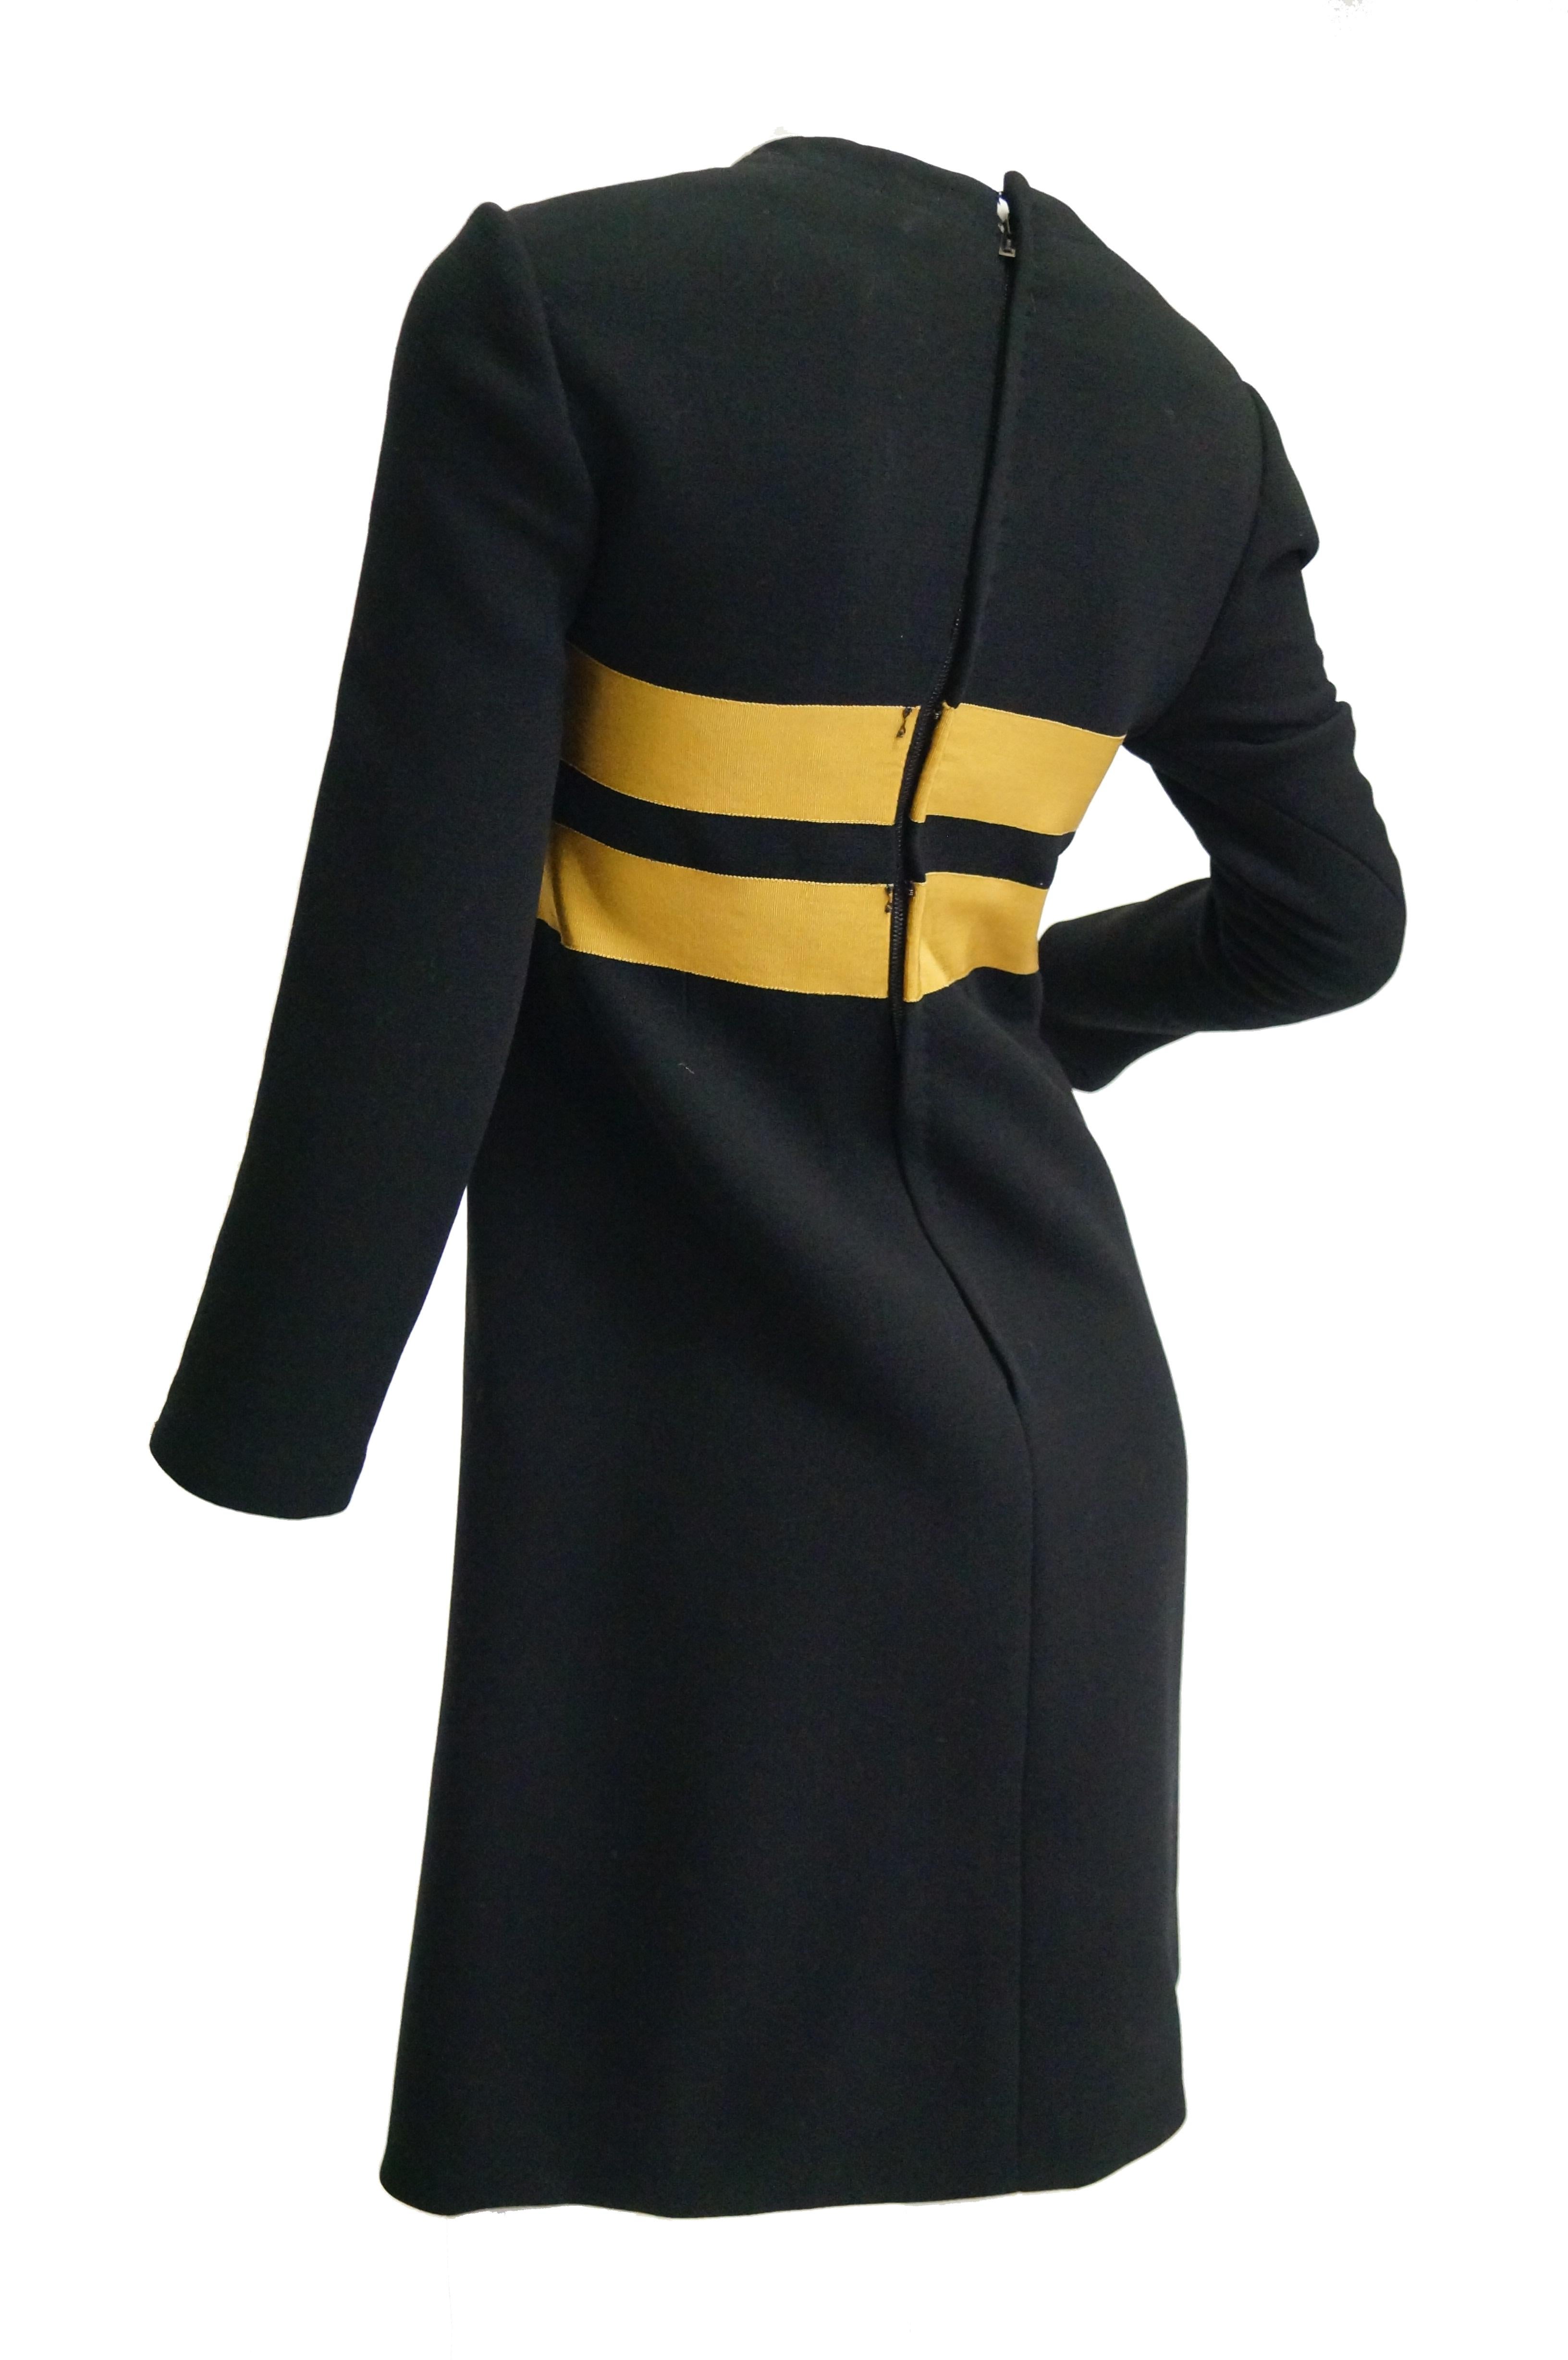  1960s Jeanne Lanvin Designed Black Wool Mod Dress with Yellow Grosgrain Buckles In Excellent Condition For Sale In Houston, TX